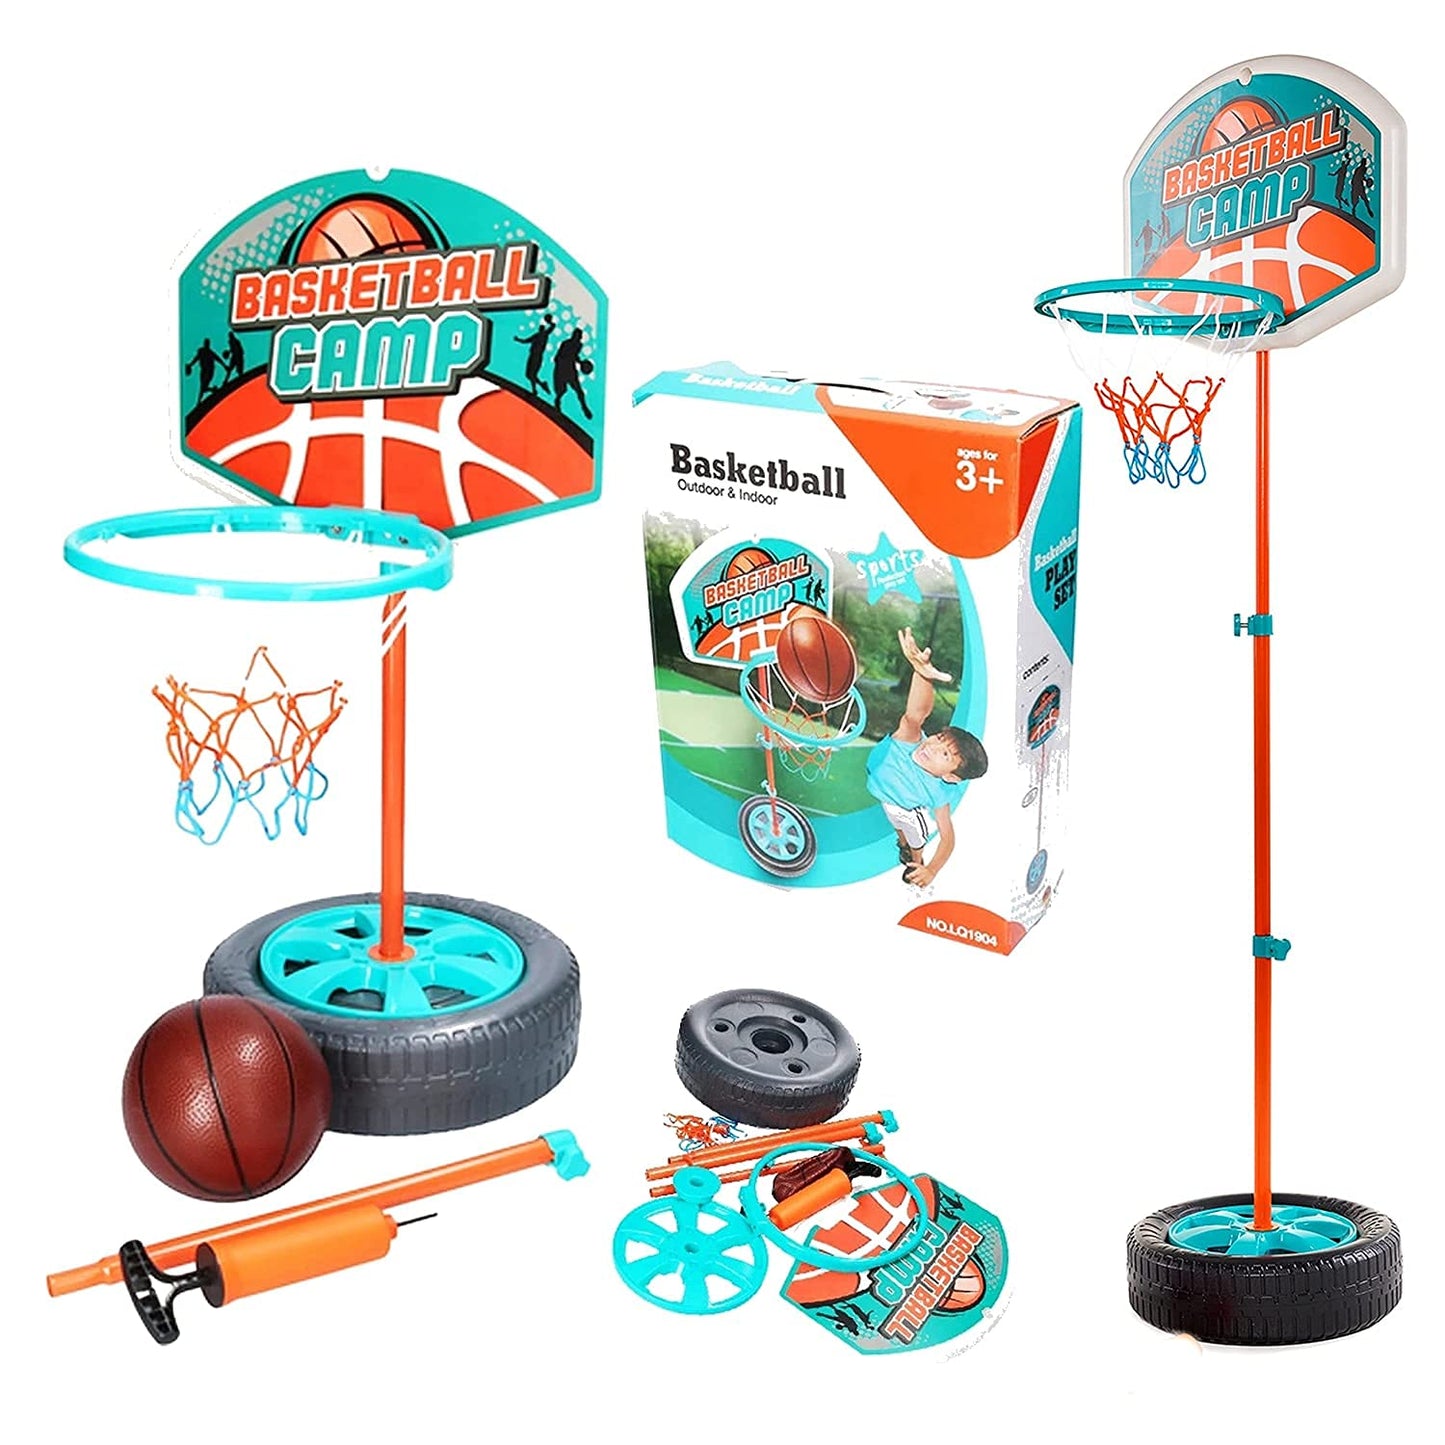 Funrally® Educational King-Sport Game Playset Toy Hoop Adjustable Height Portable Basketball Stand for Kids Children's Indoor Outdoor Basket Ball Game - 3 Level Adjustable Height for Differnt Age